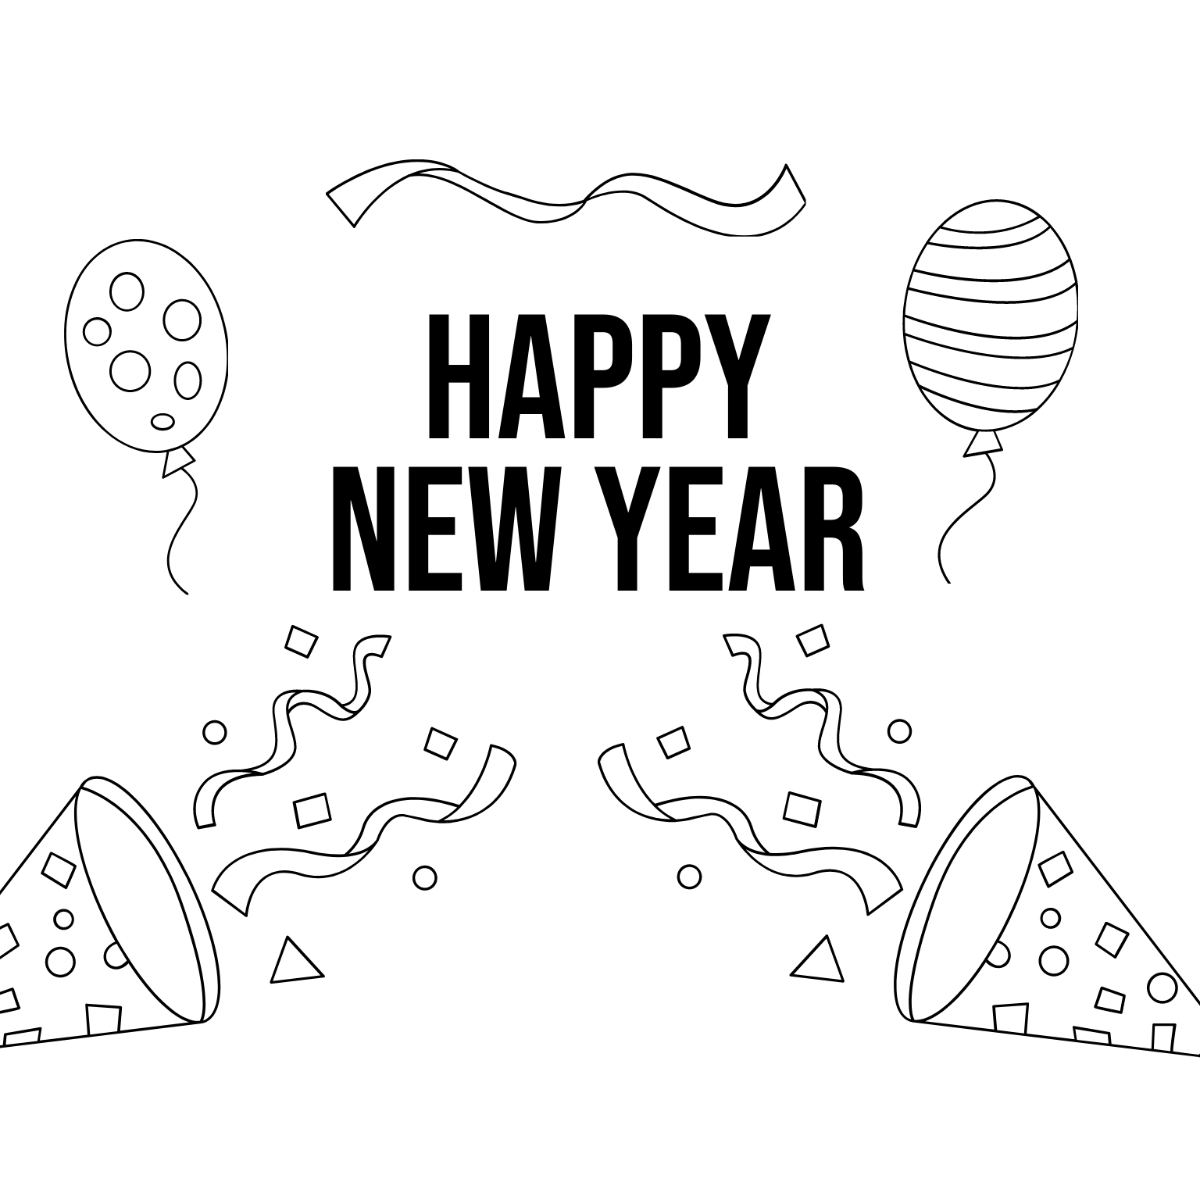 Happy New Year Card Coloring Page | Easy Drawing Guides-saigonsouth.com.vn